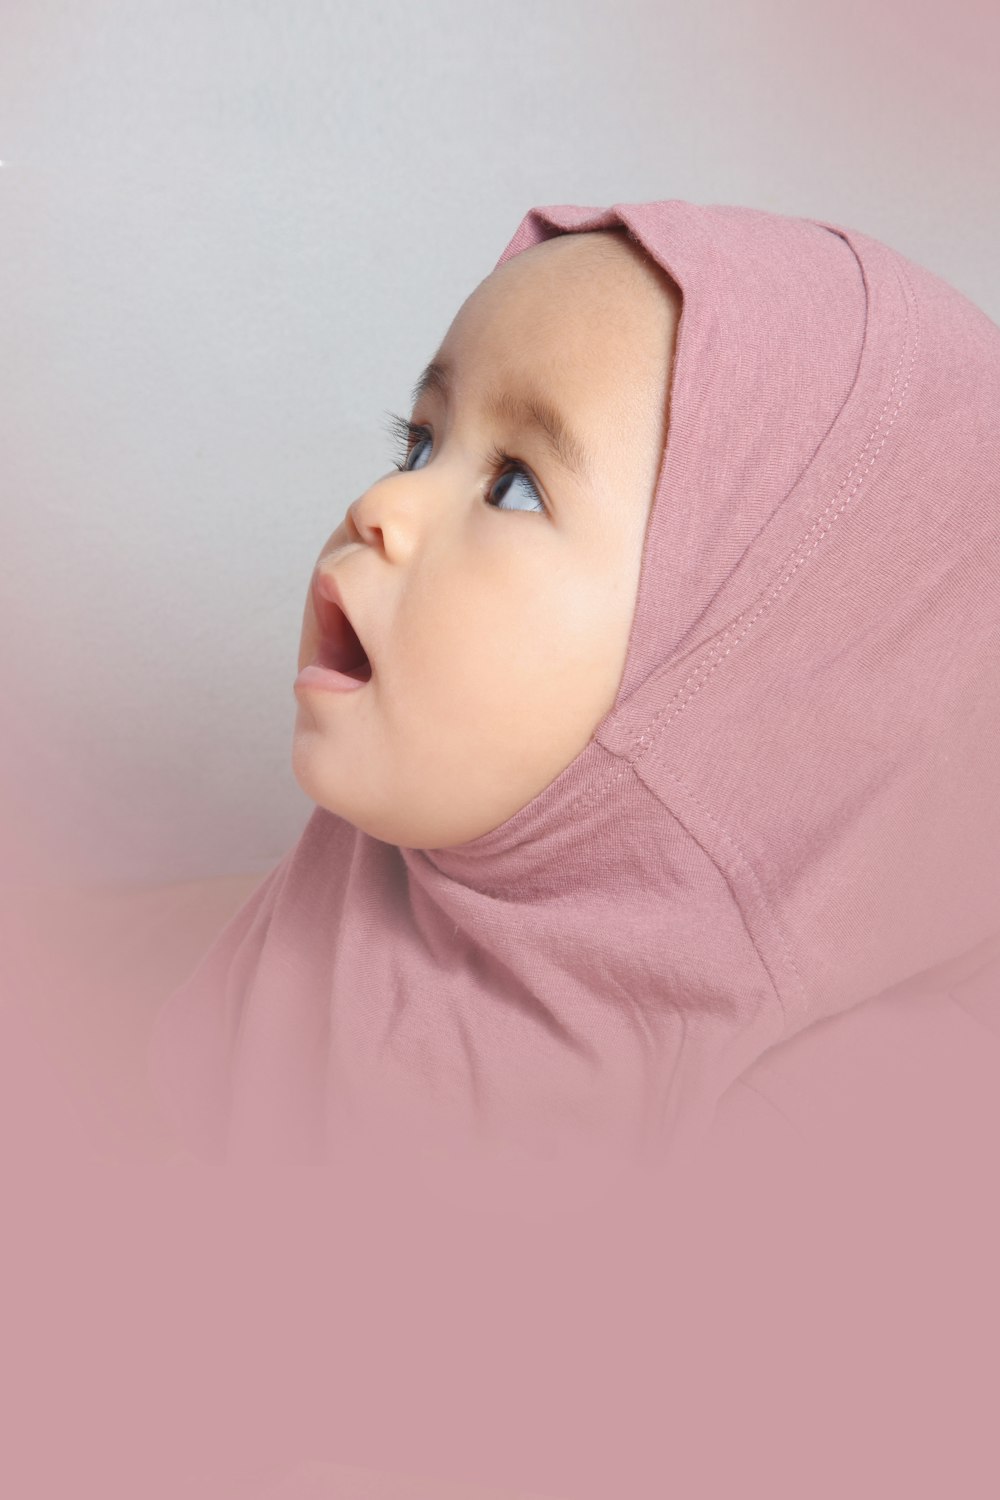 baby in pink hijab and pink shirt